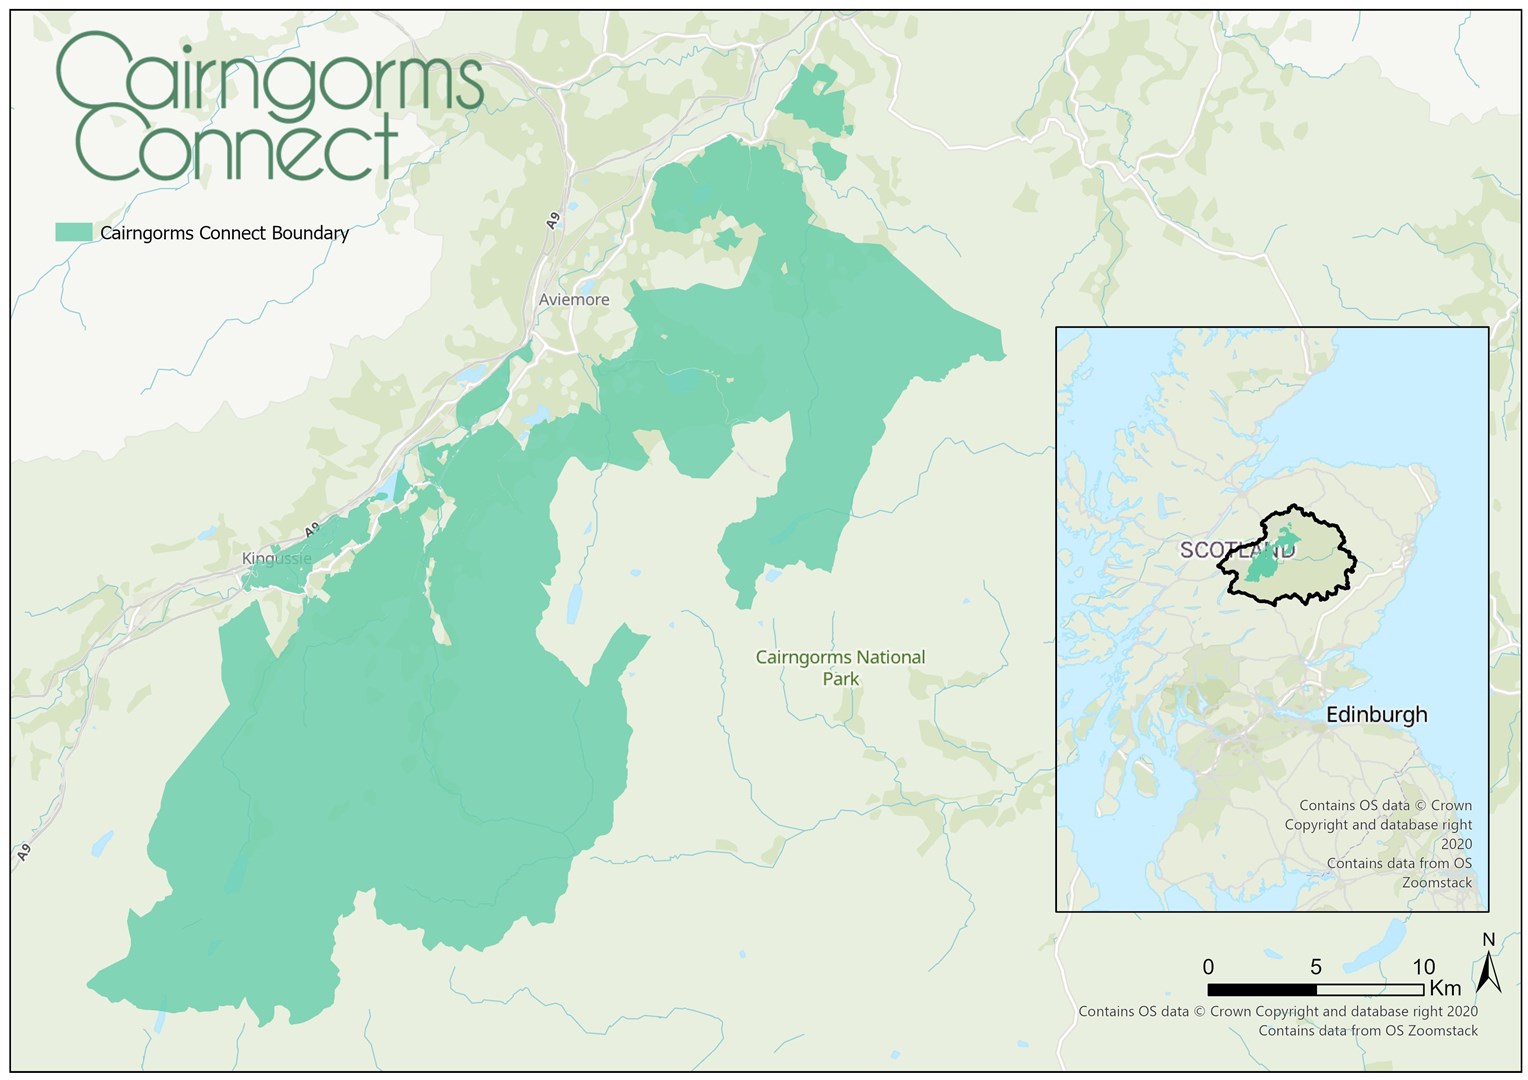 Cairngorms Connect are publishing new research which demonstrates the potential of forest regeneration in the Cairngorms National Park and wider Scottish Highlands.